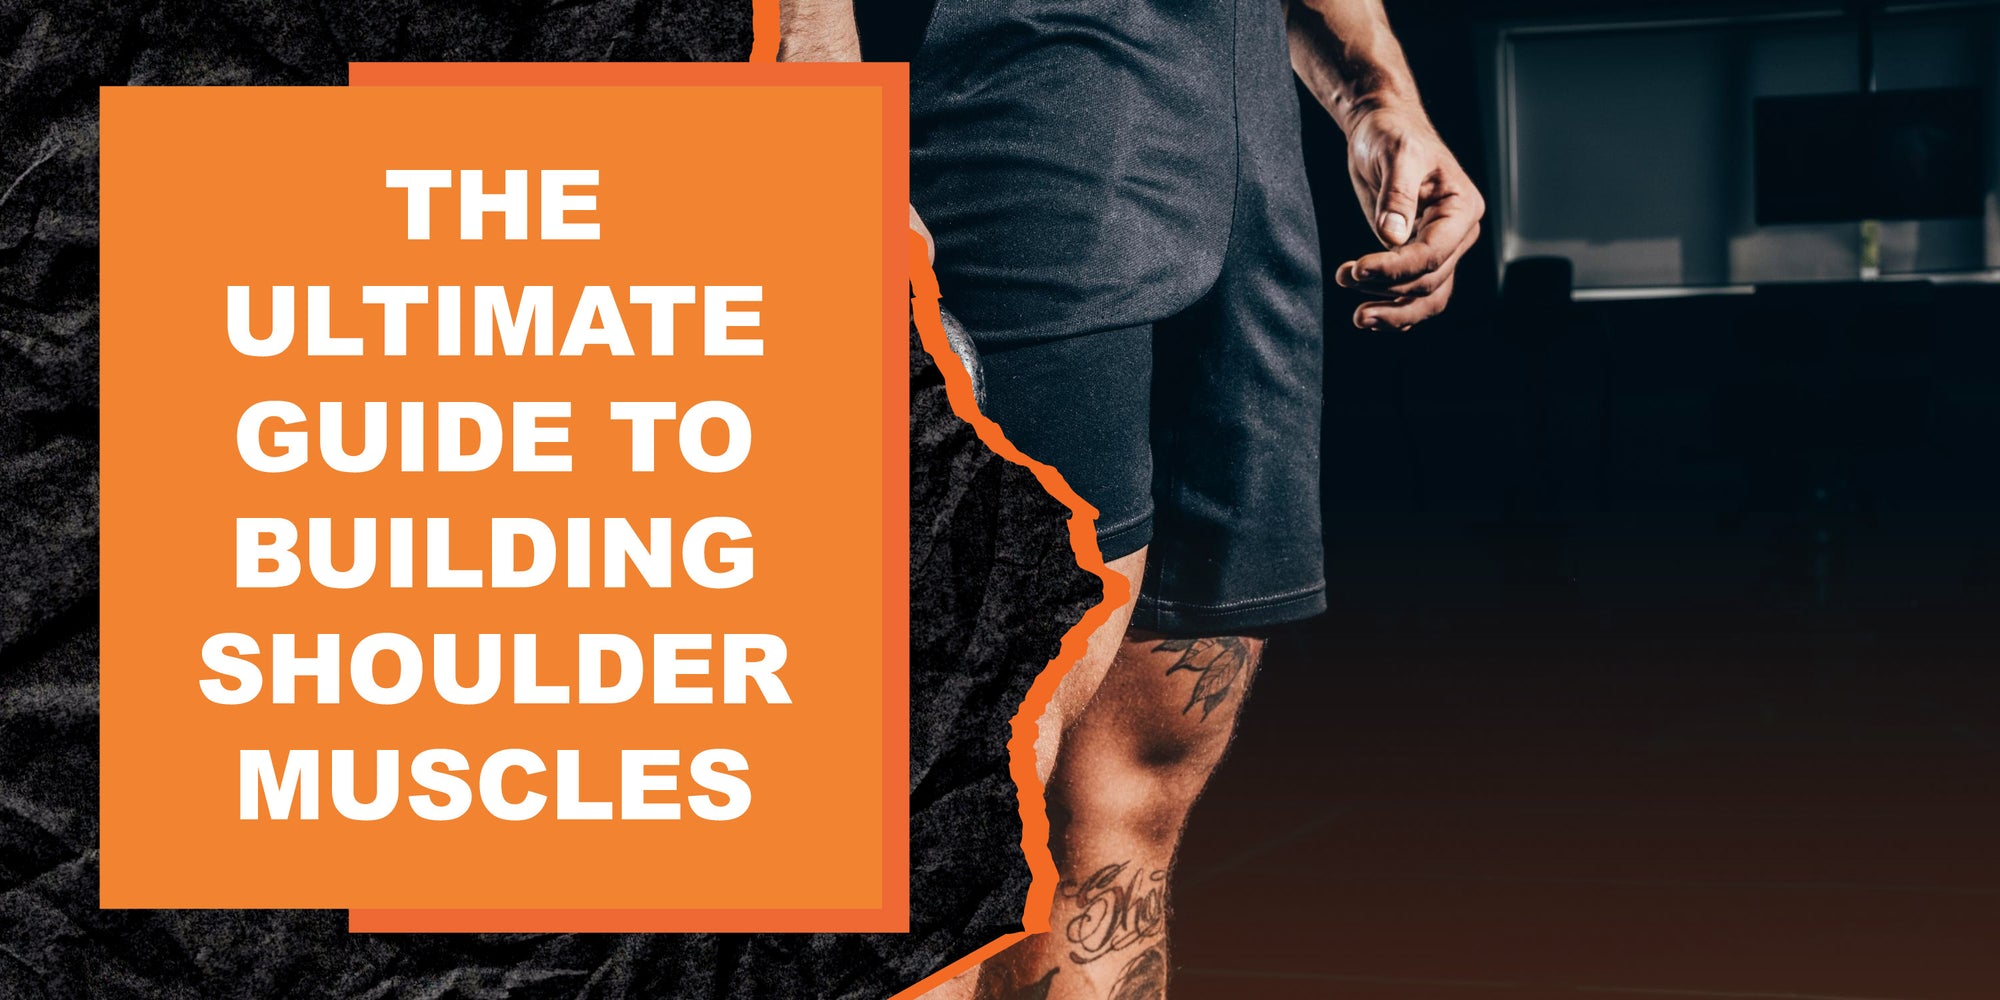 The Ultimate Guide to Building Shoulder Muscles